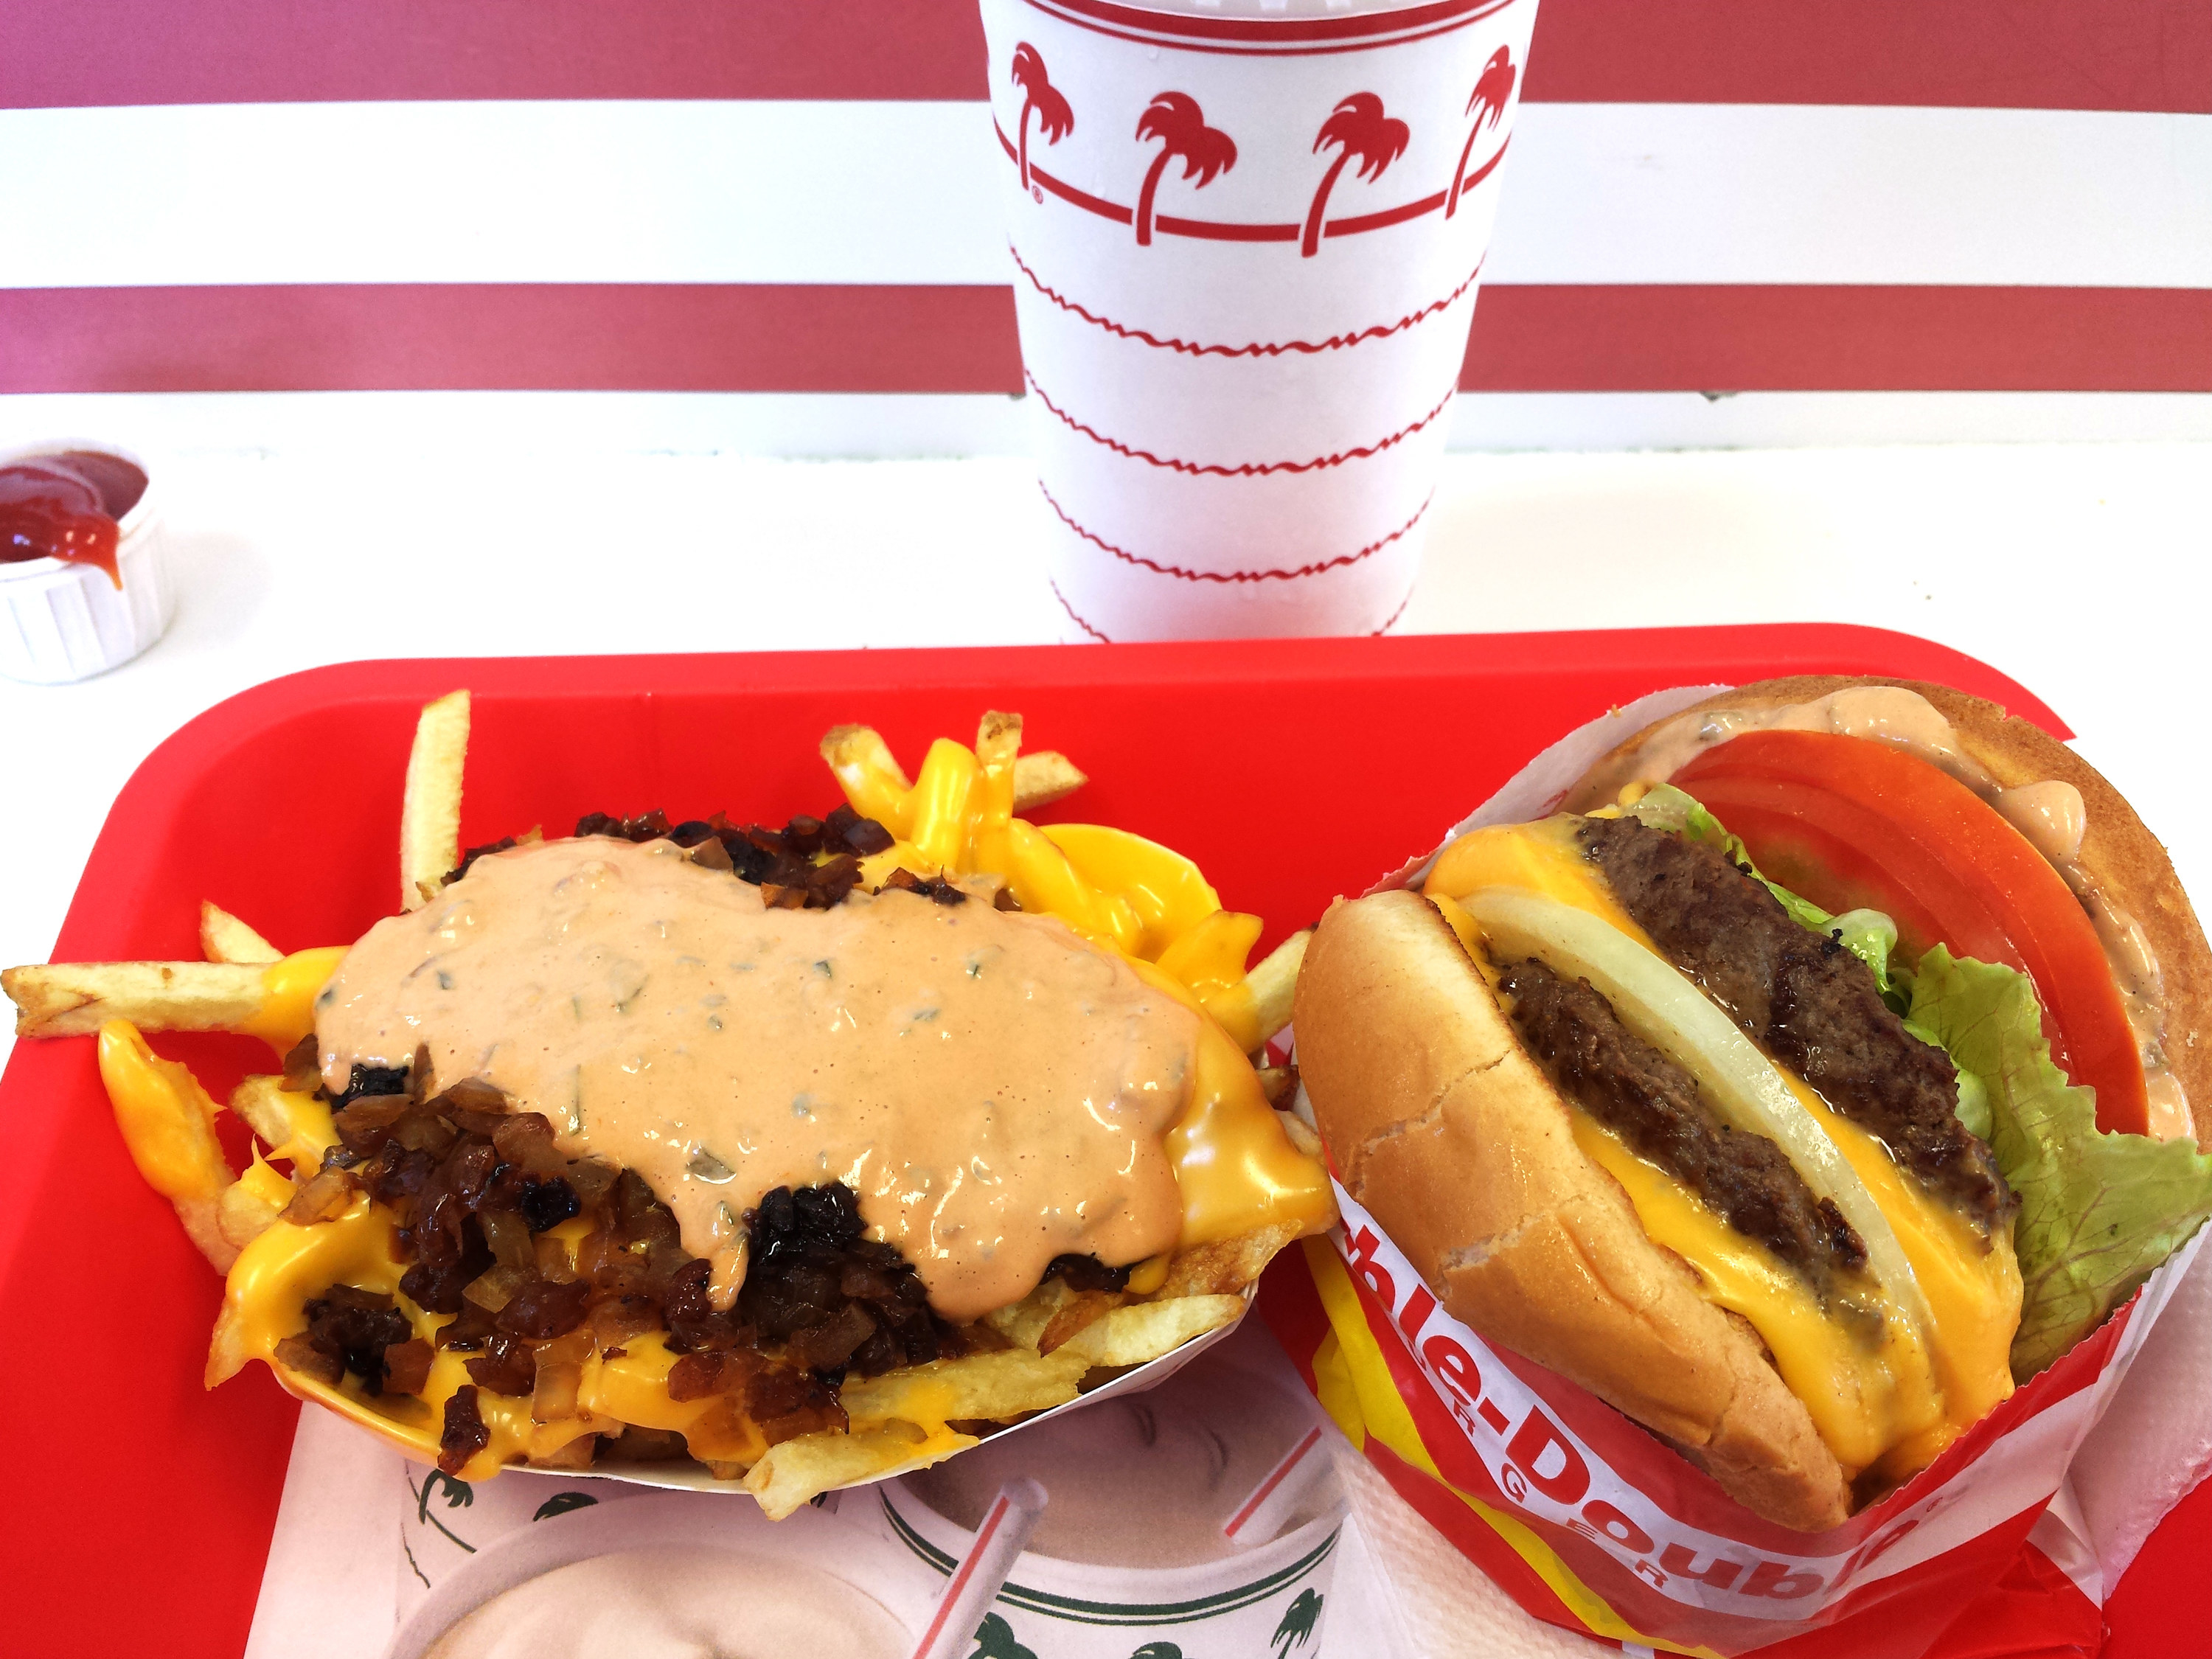 Animal Style fries and an In-N-Out burger with a soda